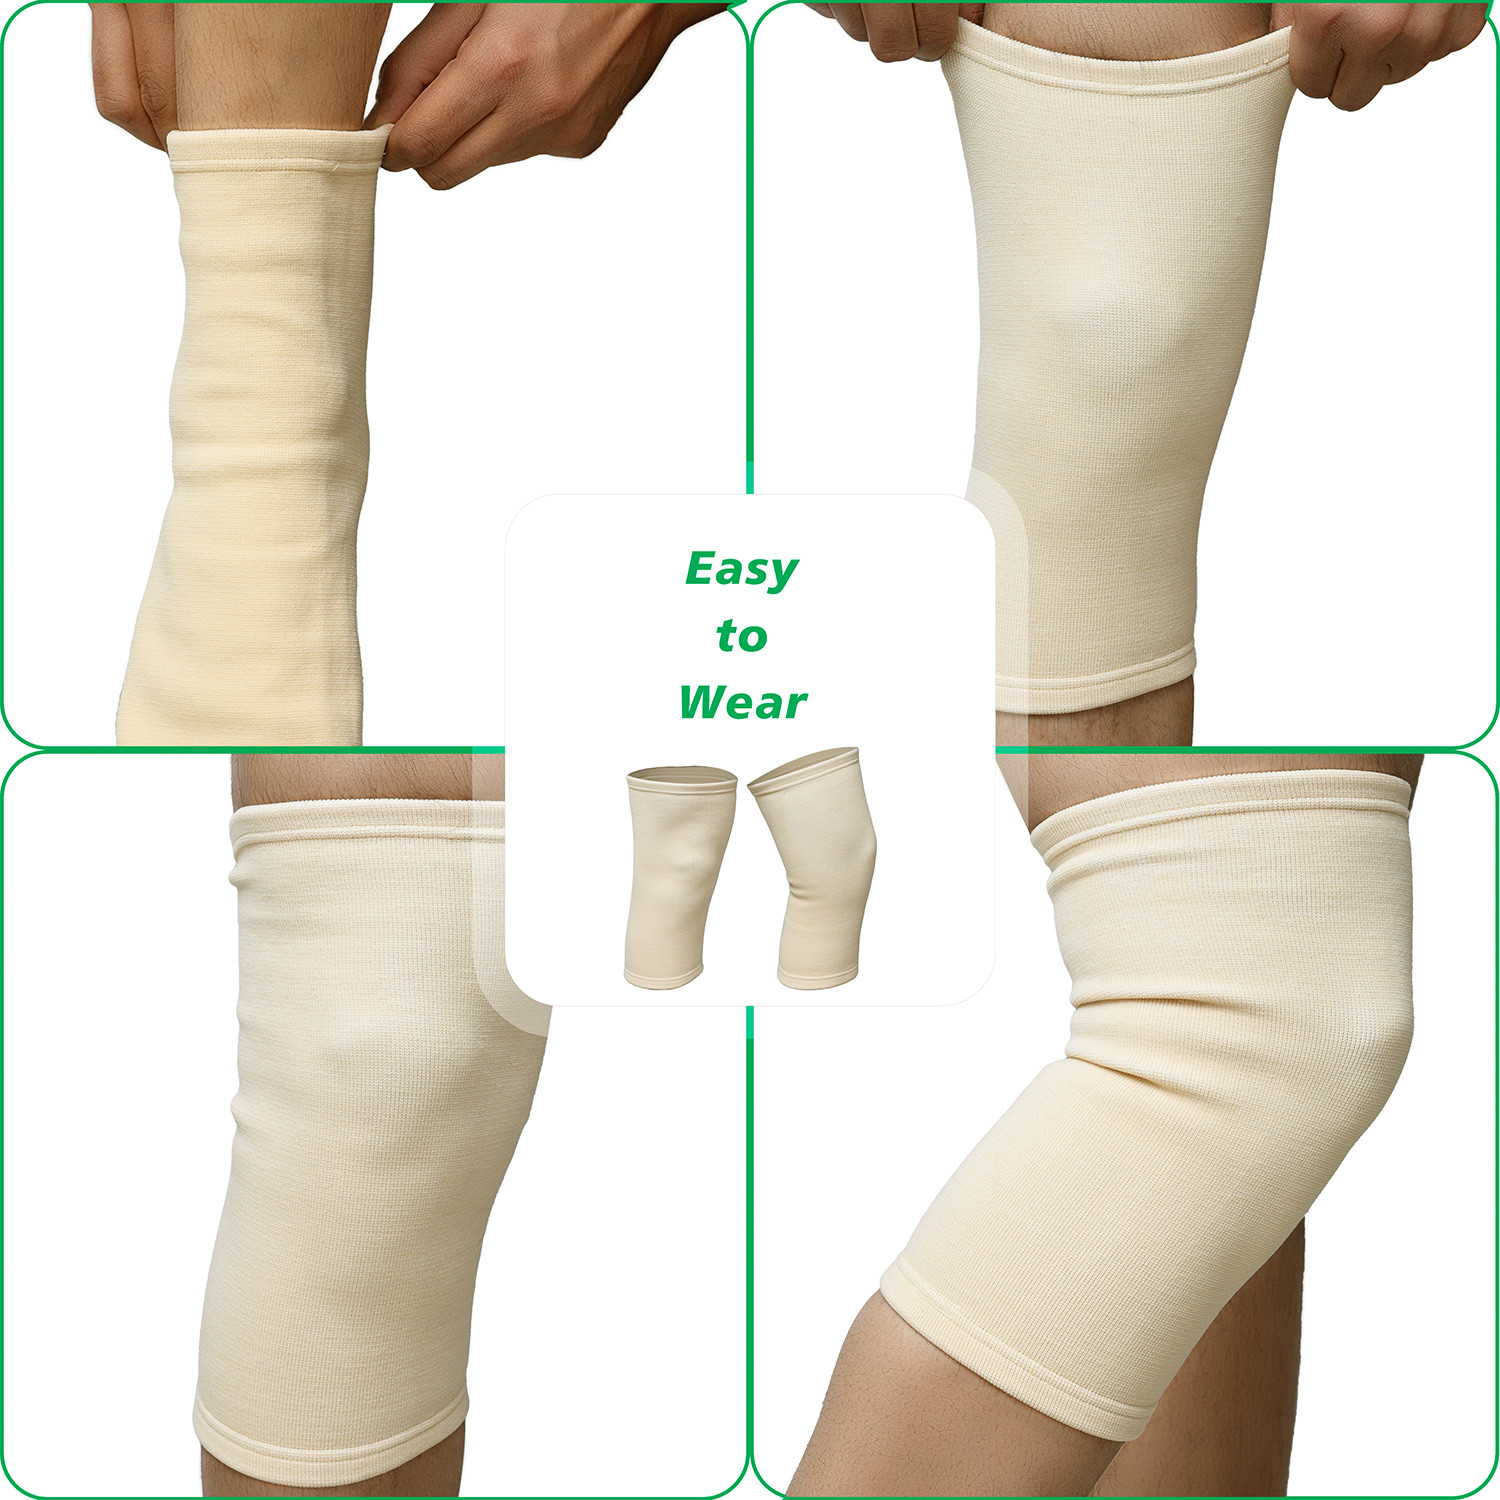 Kuber Industries Knee Cap | Cotton 4 Way Compression Knee Sleeves |Sleeves For Joint Pain | Sleeves For Arthritis Relief | Unisex Knee Wraps | Knee Bands |Size-M|1 Pair|Cream